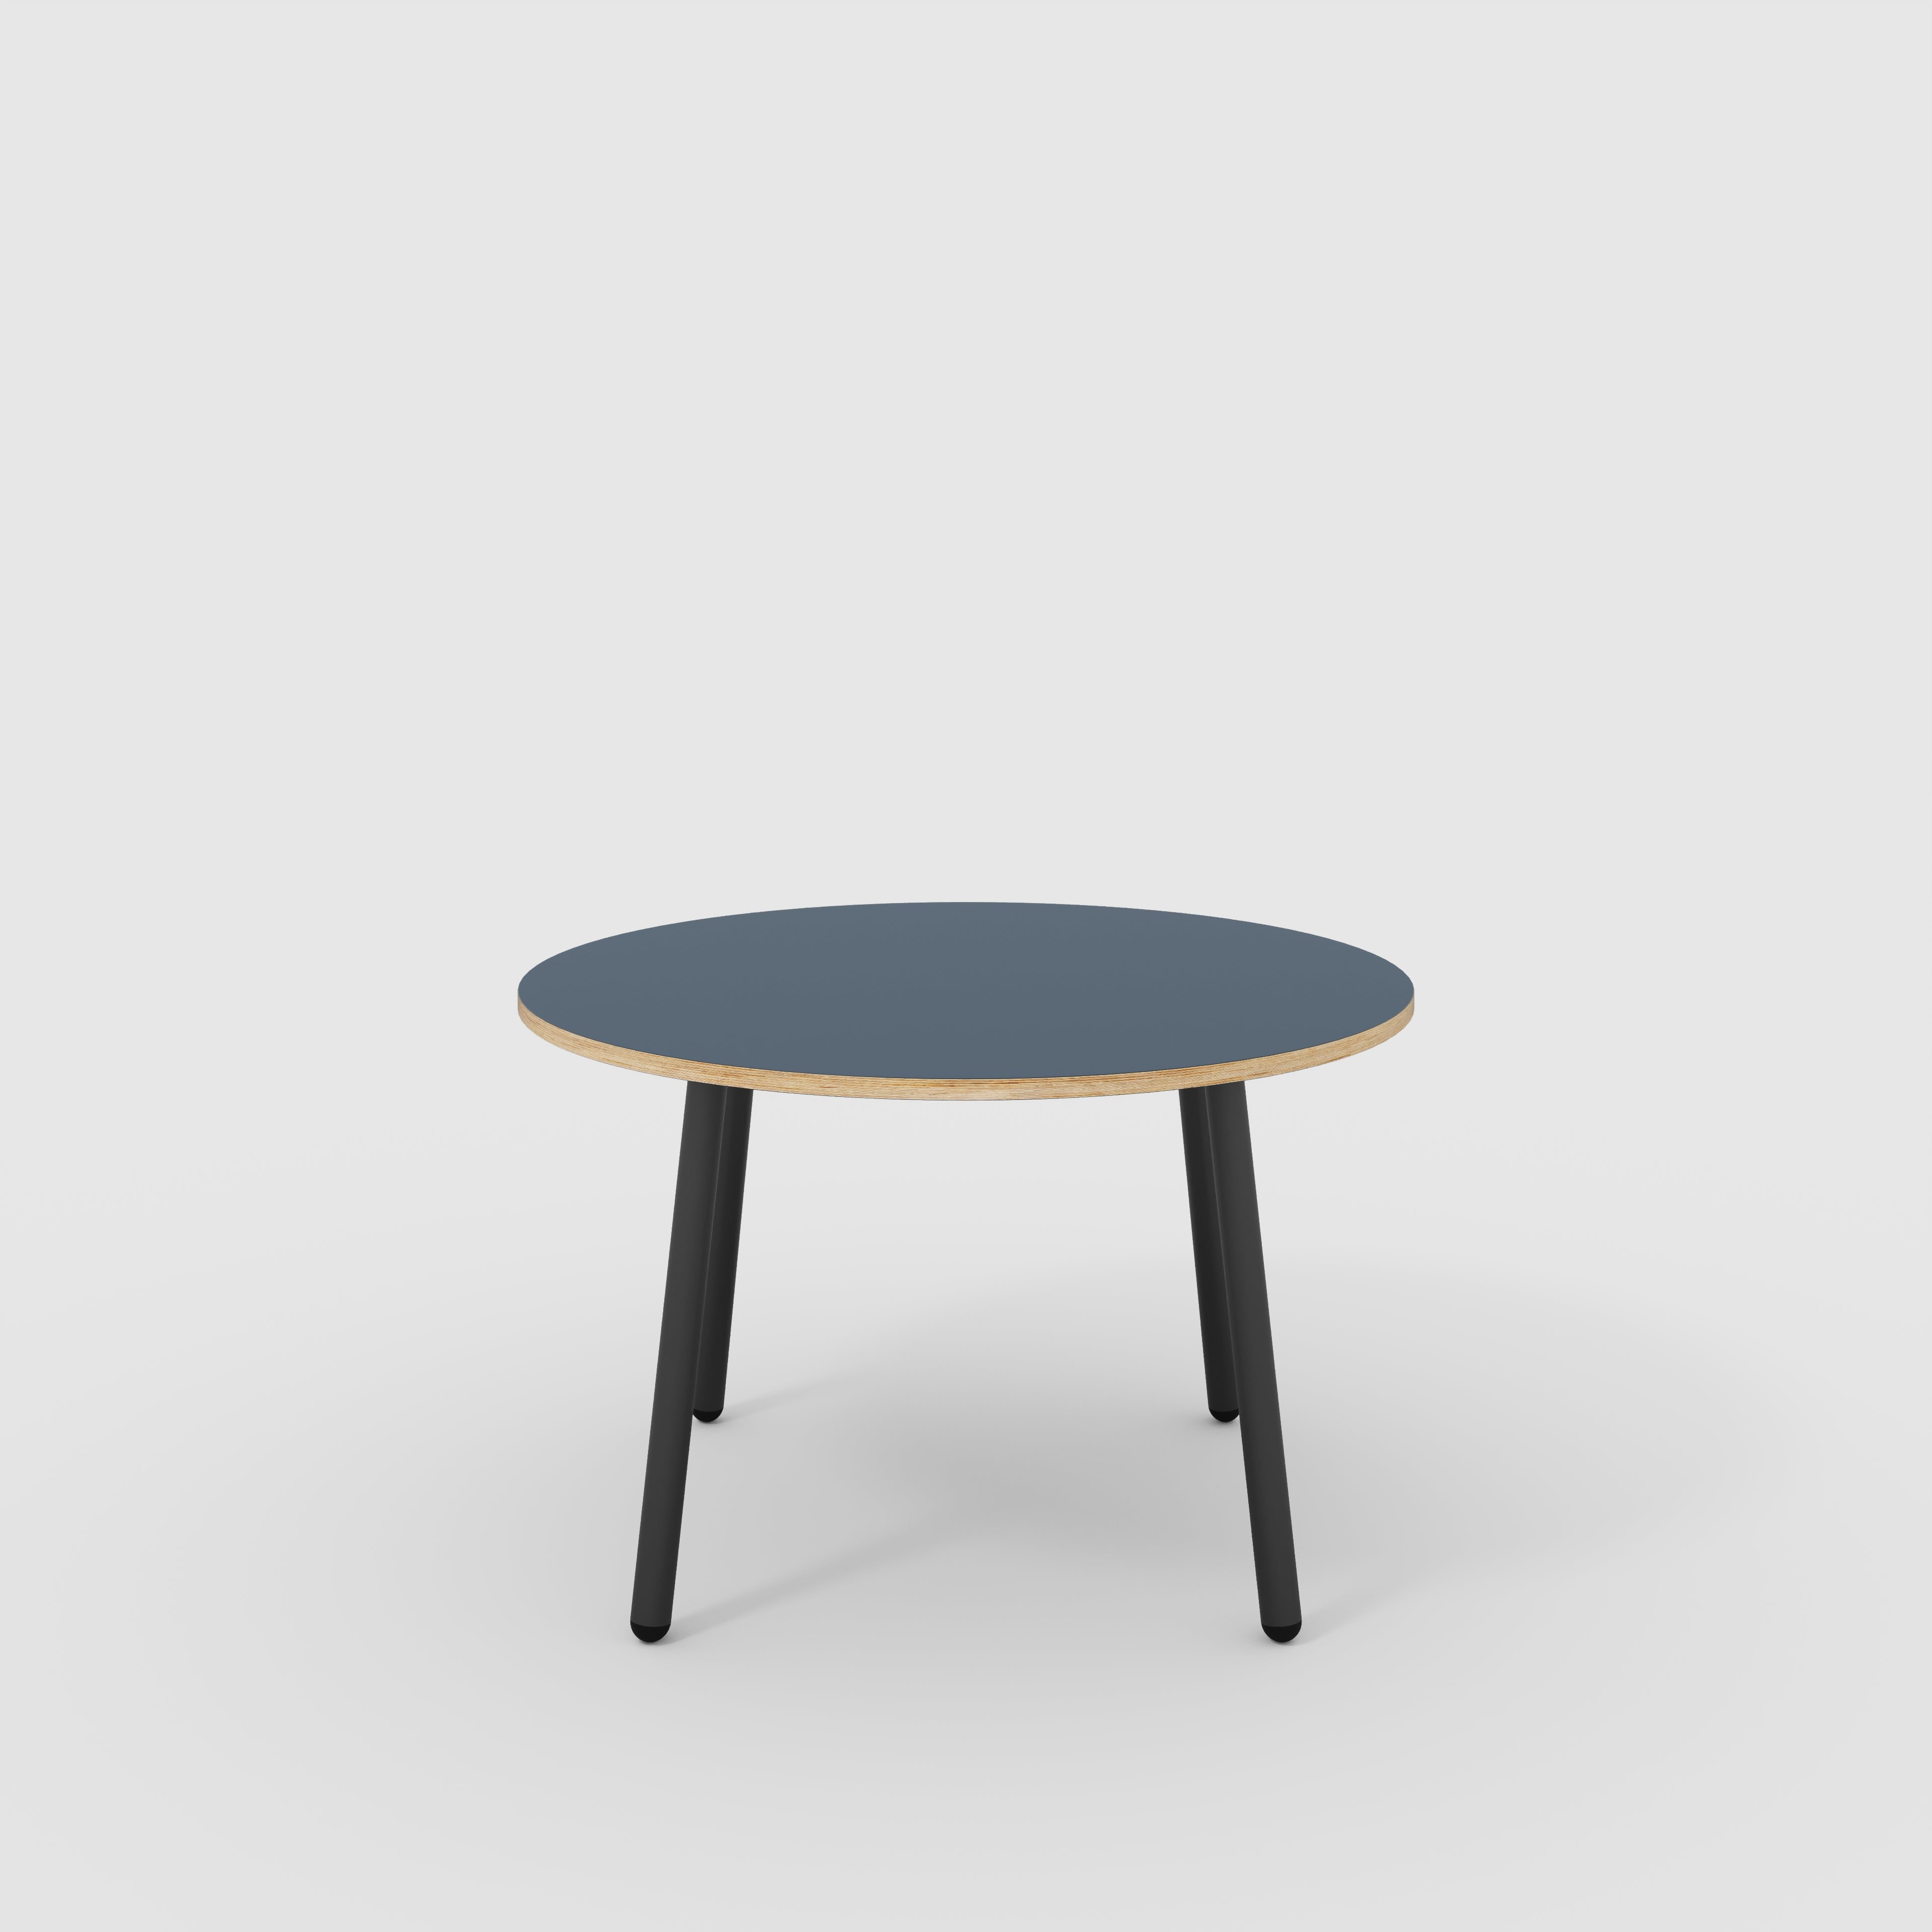 Round Table with Black Round Single Pin Legs - Formica Night Sea Blue - 1200(dia) x 750(h)